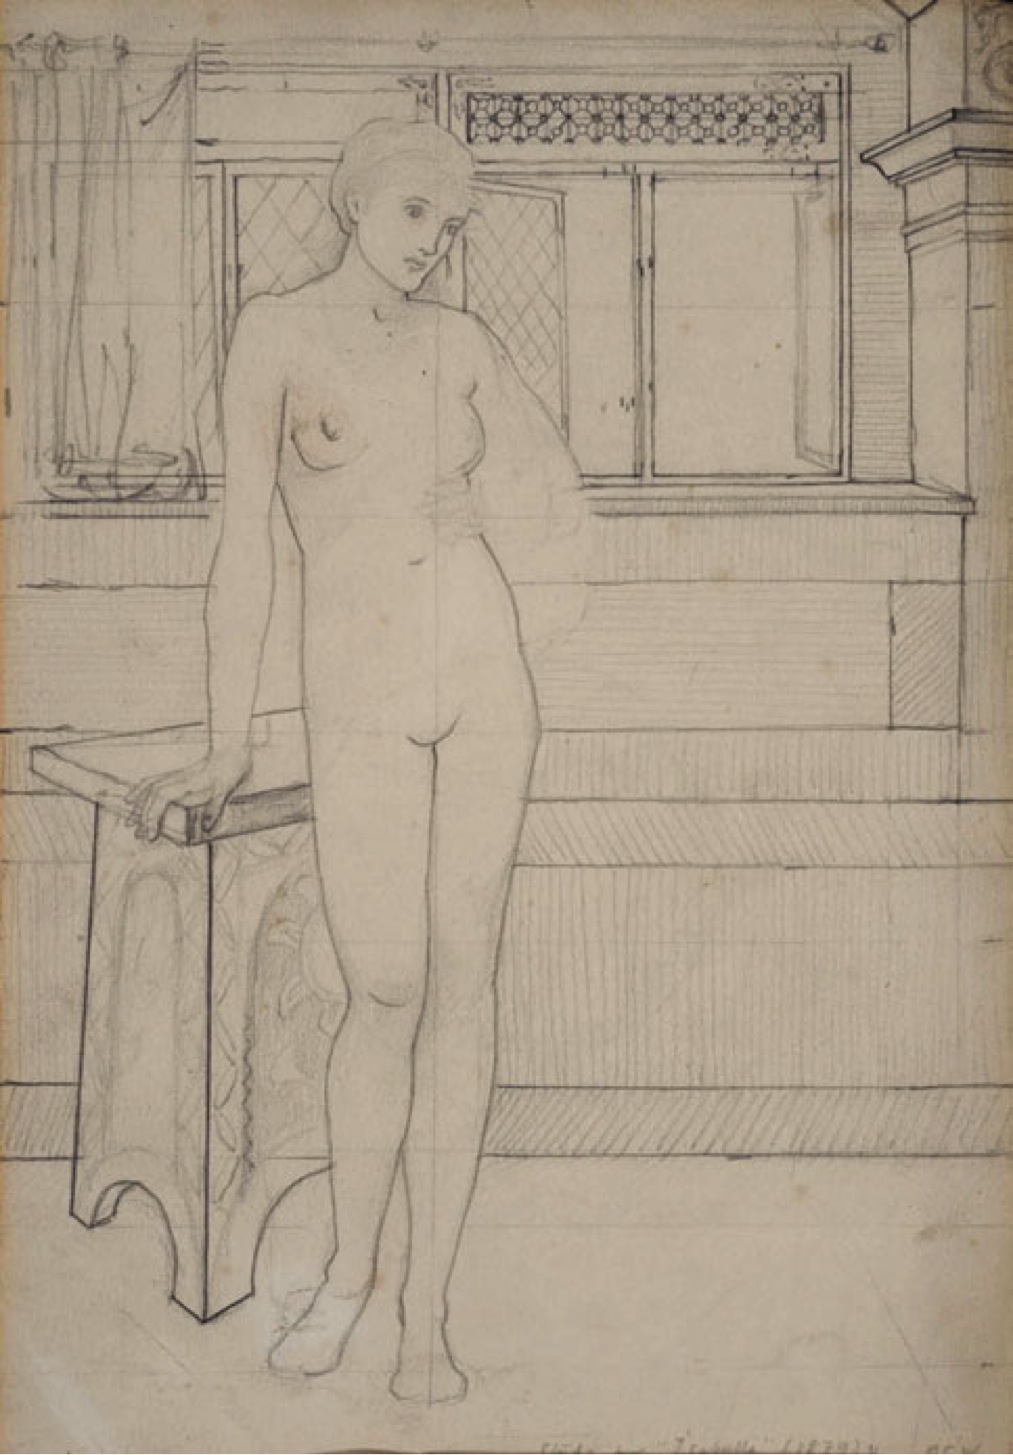 Collections of Drawings antique (10122).jpg